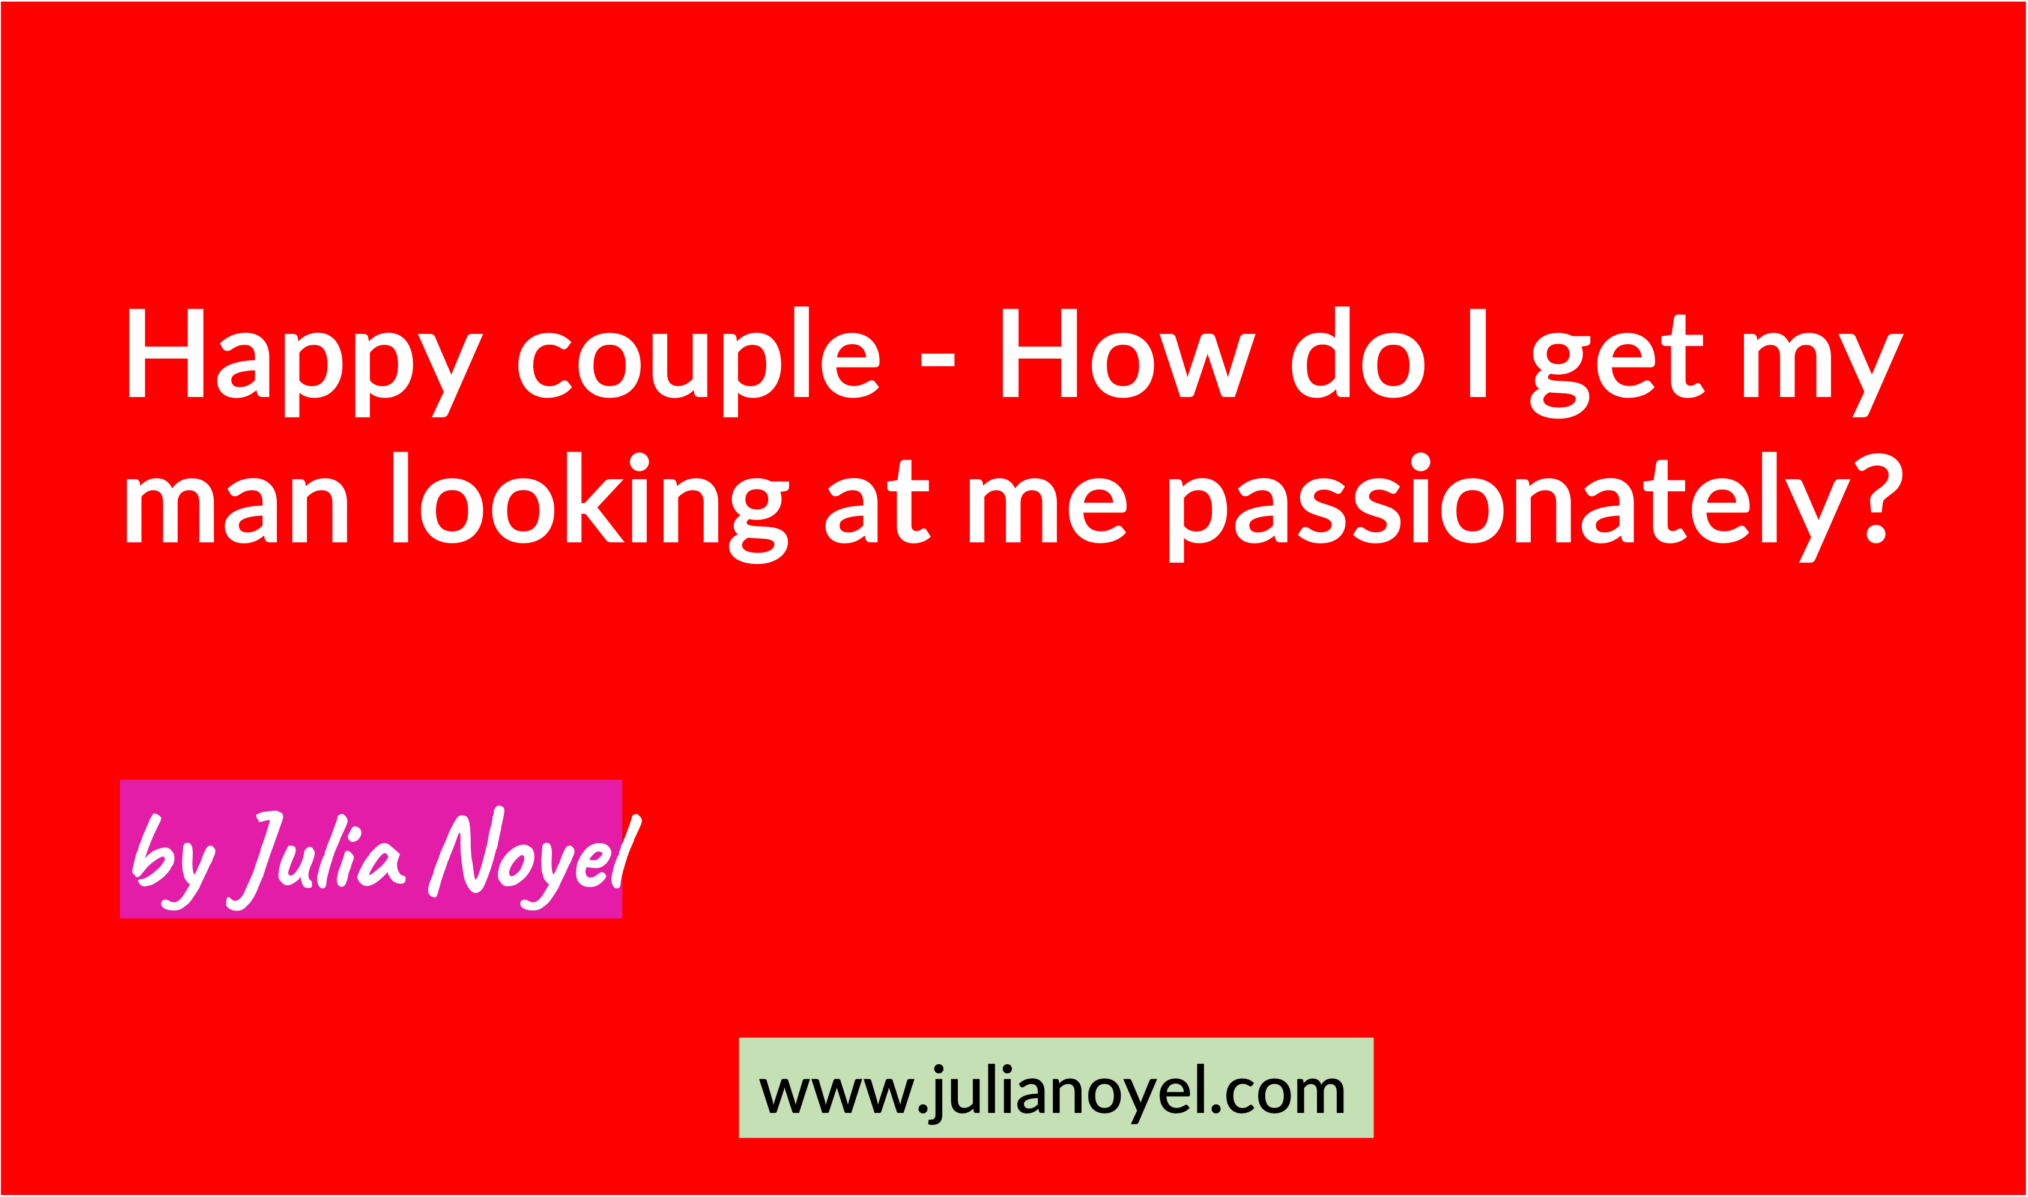 Happy couple - How do I get my man looking at me passionately? by Julia Noyel